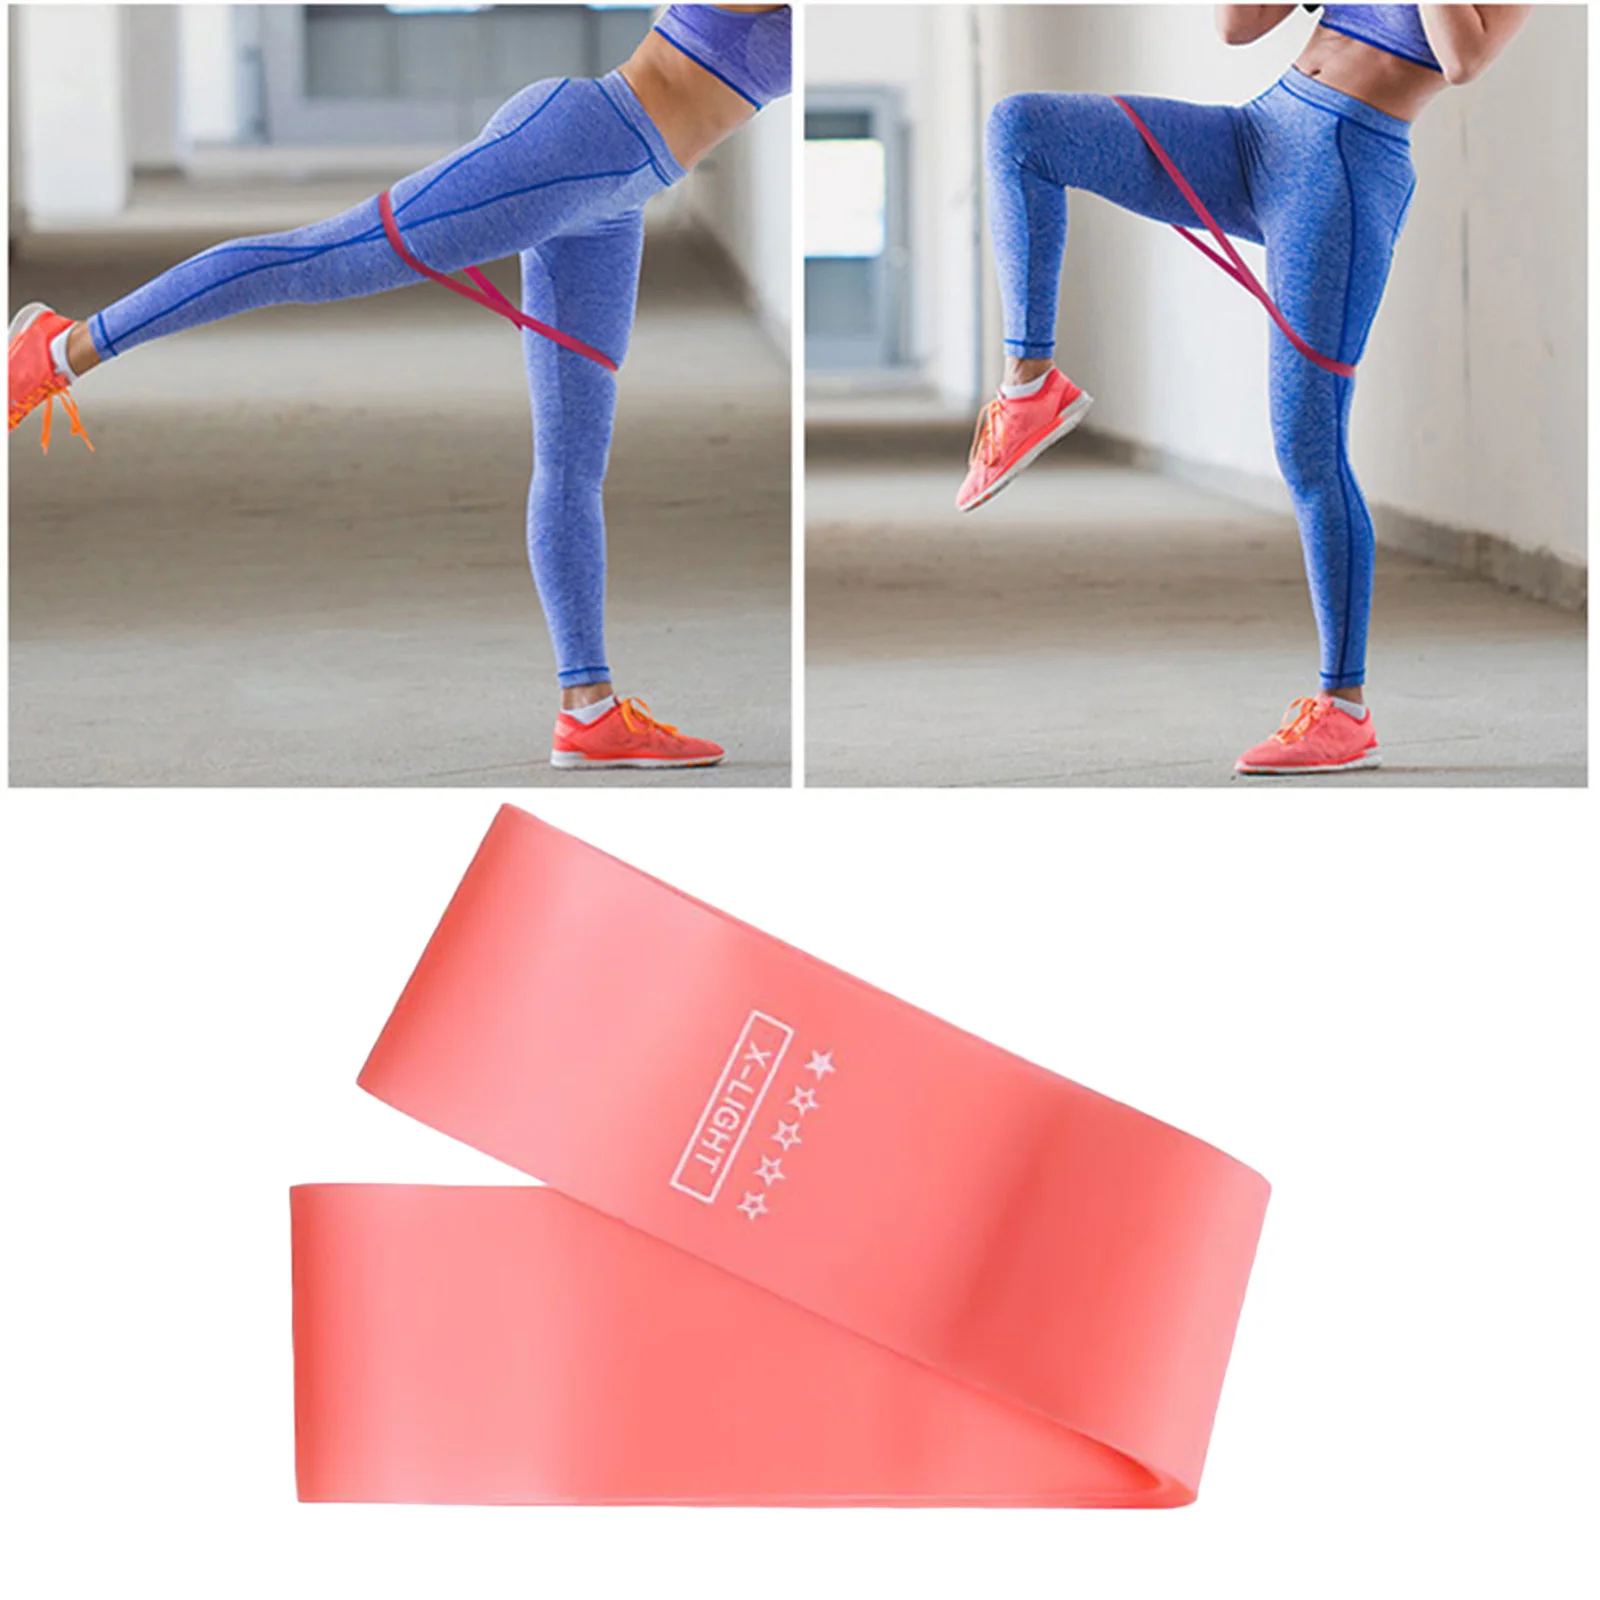 Professional Sports Gym Non Slip Resistance Band for Legs and Butt Exercise